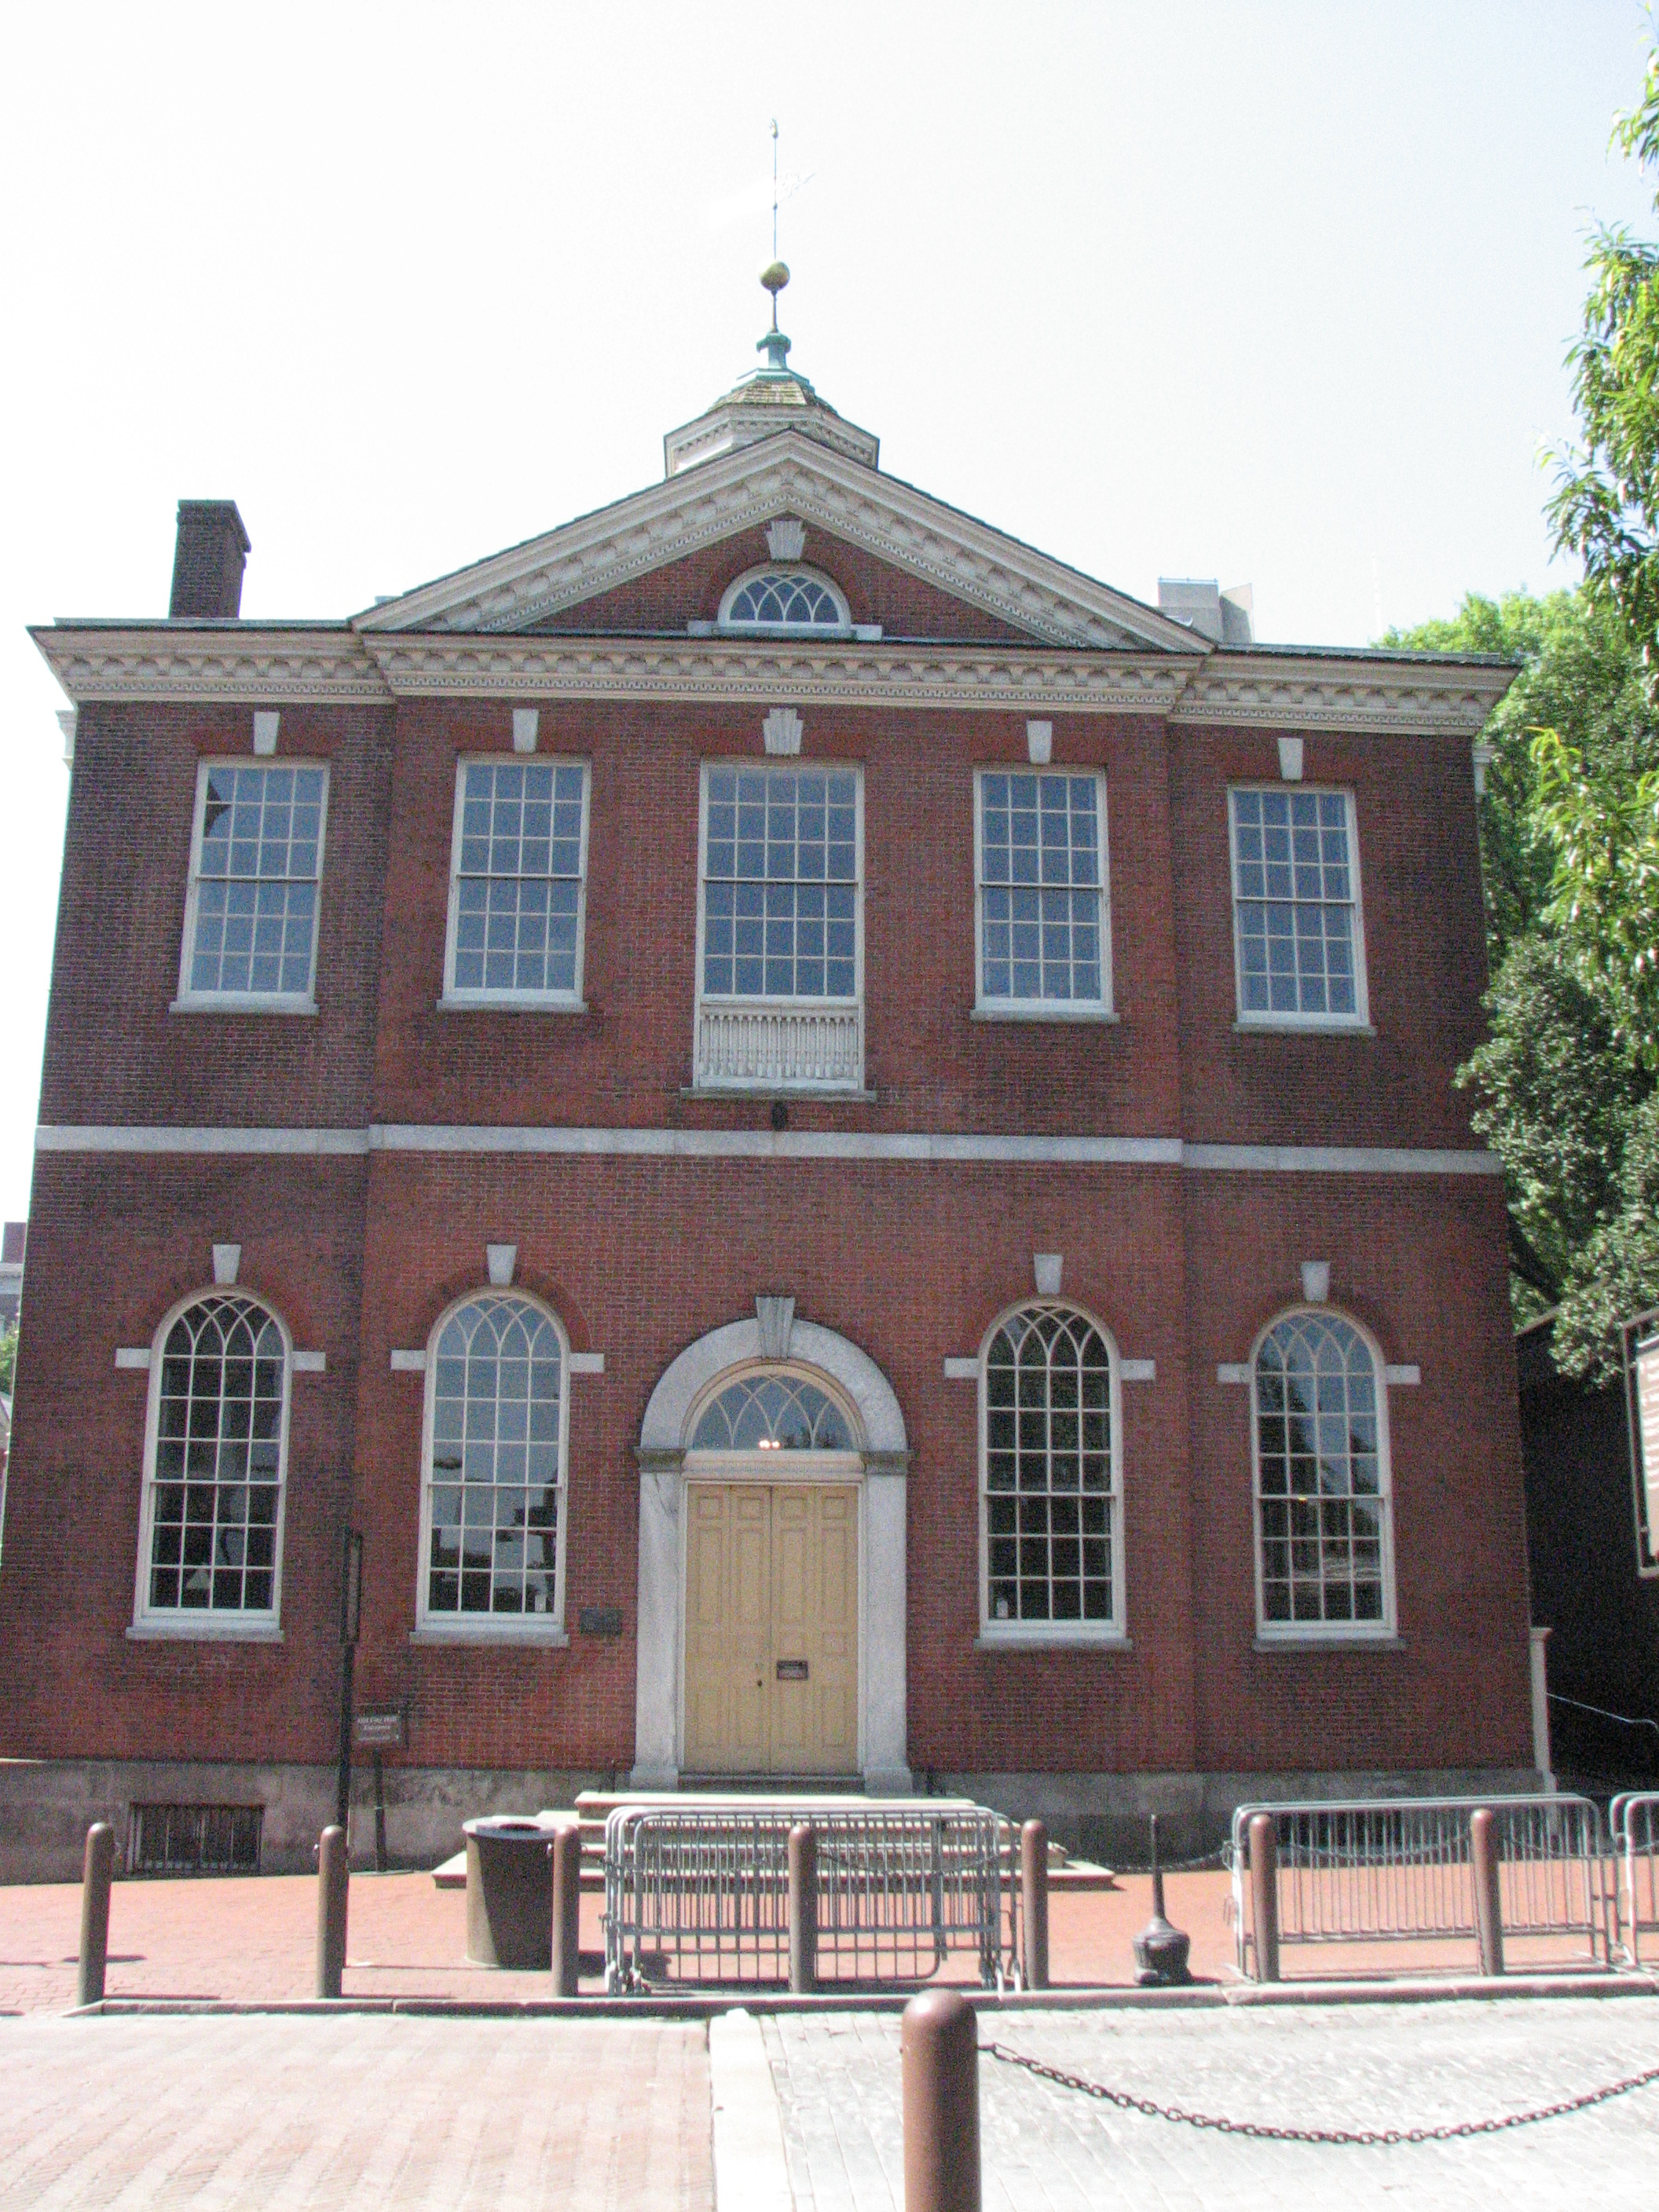 To the east of Independence Hall is the Federal-style building used by the Supreme Court and later served as City Hall.